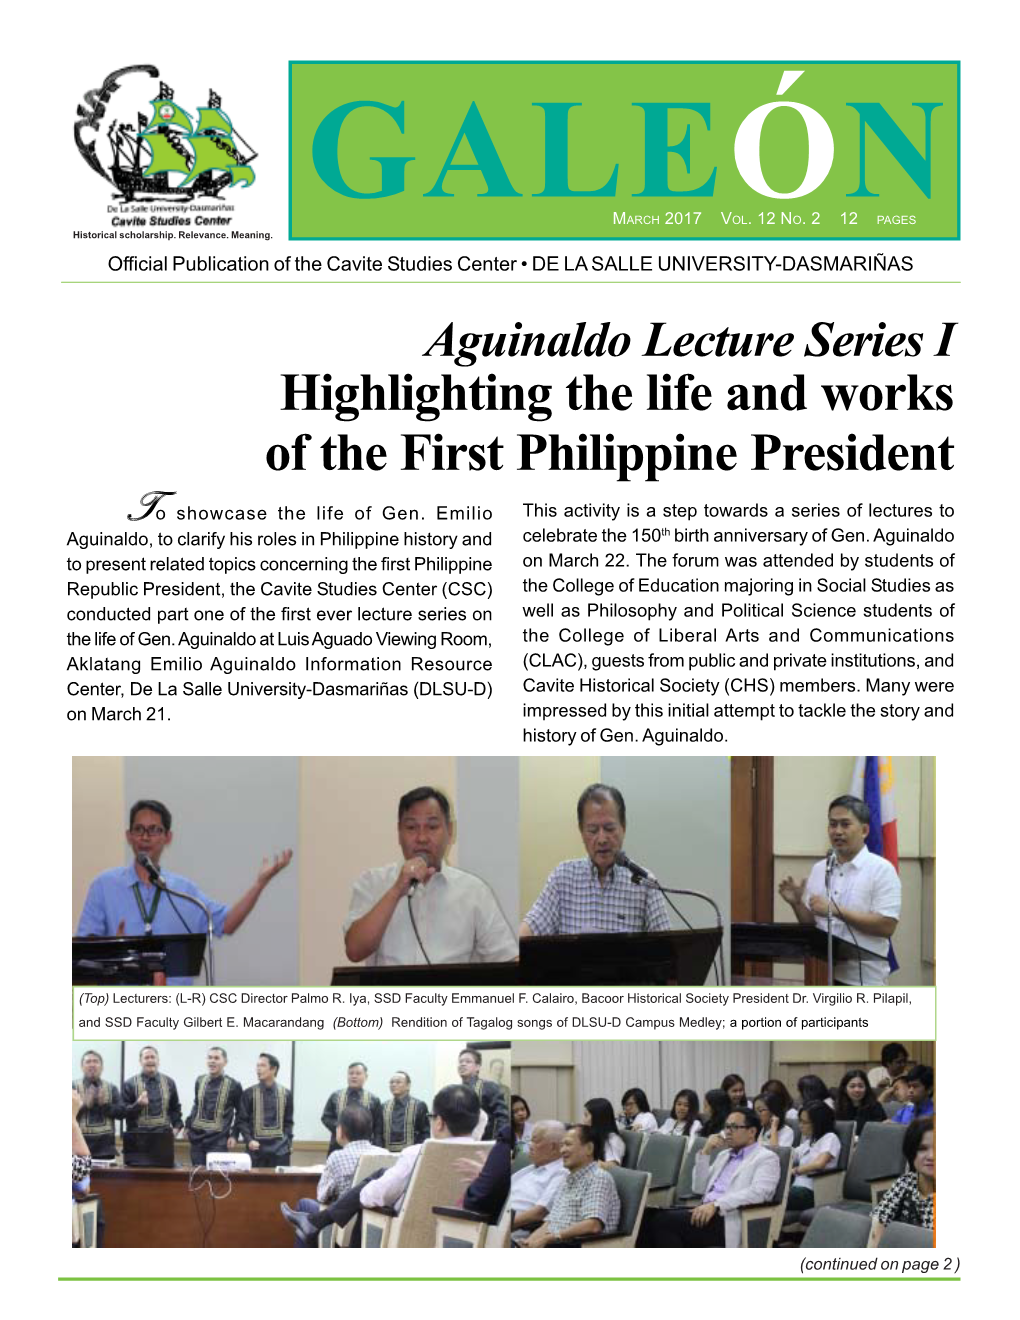 Highlighting the Life and Works of the First Philippine President to Showcase the Life of Gen